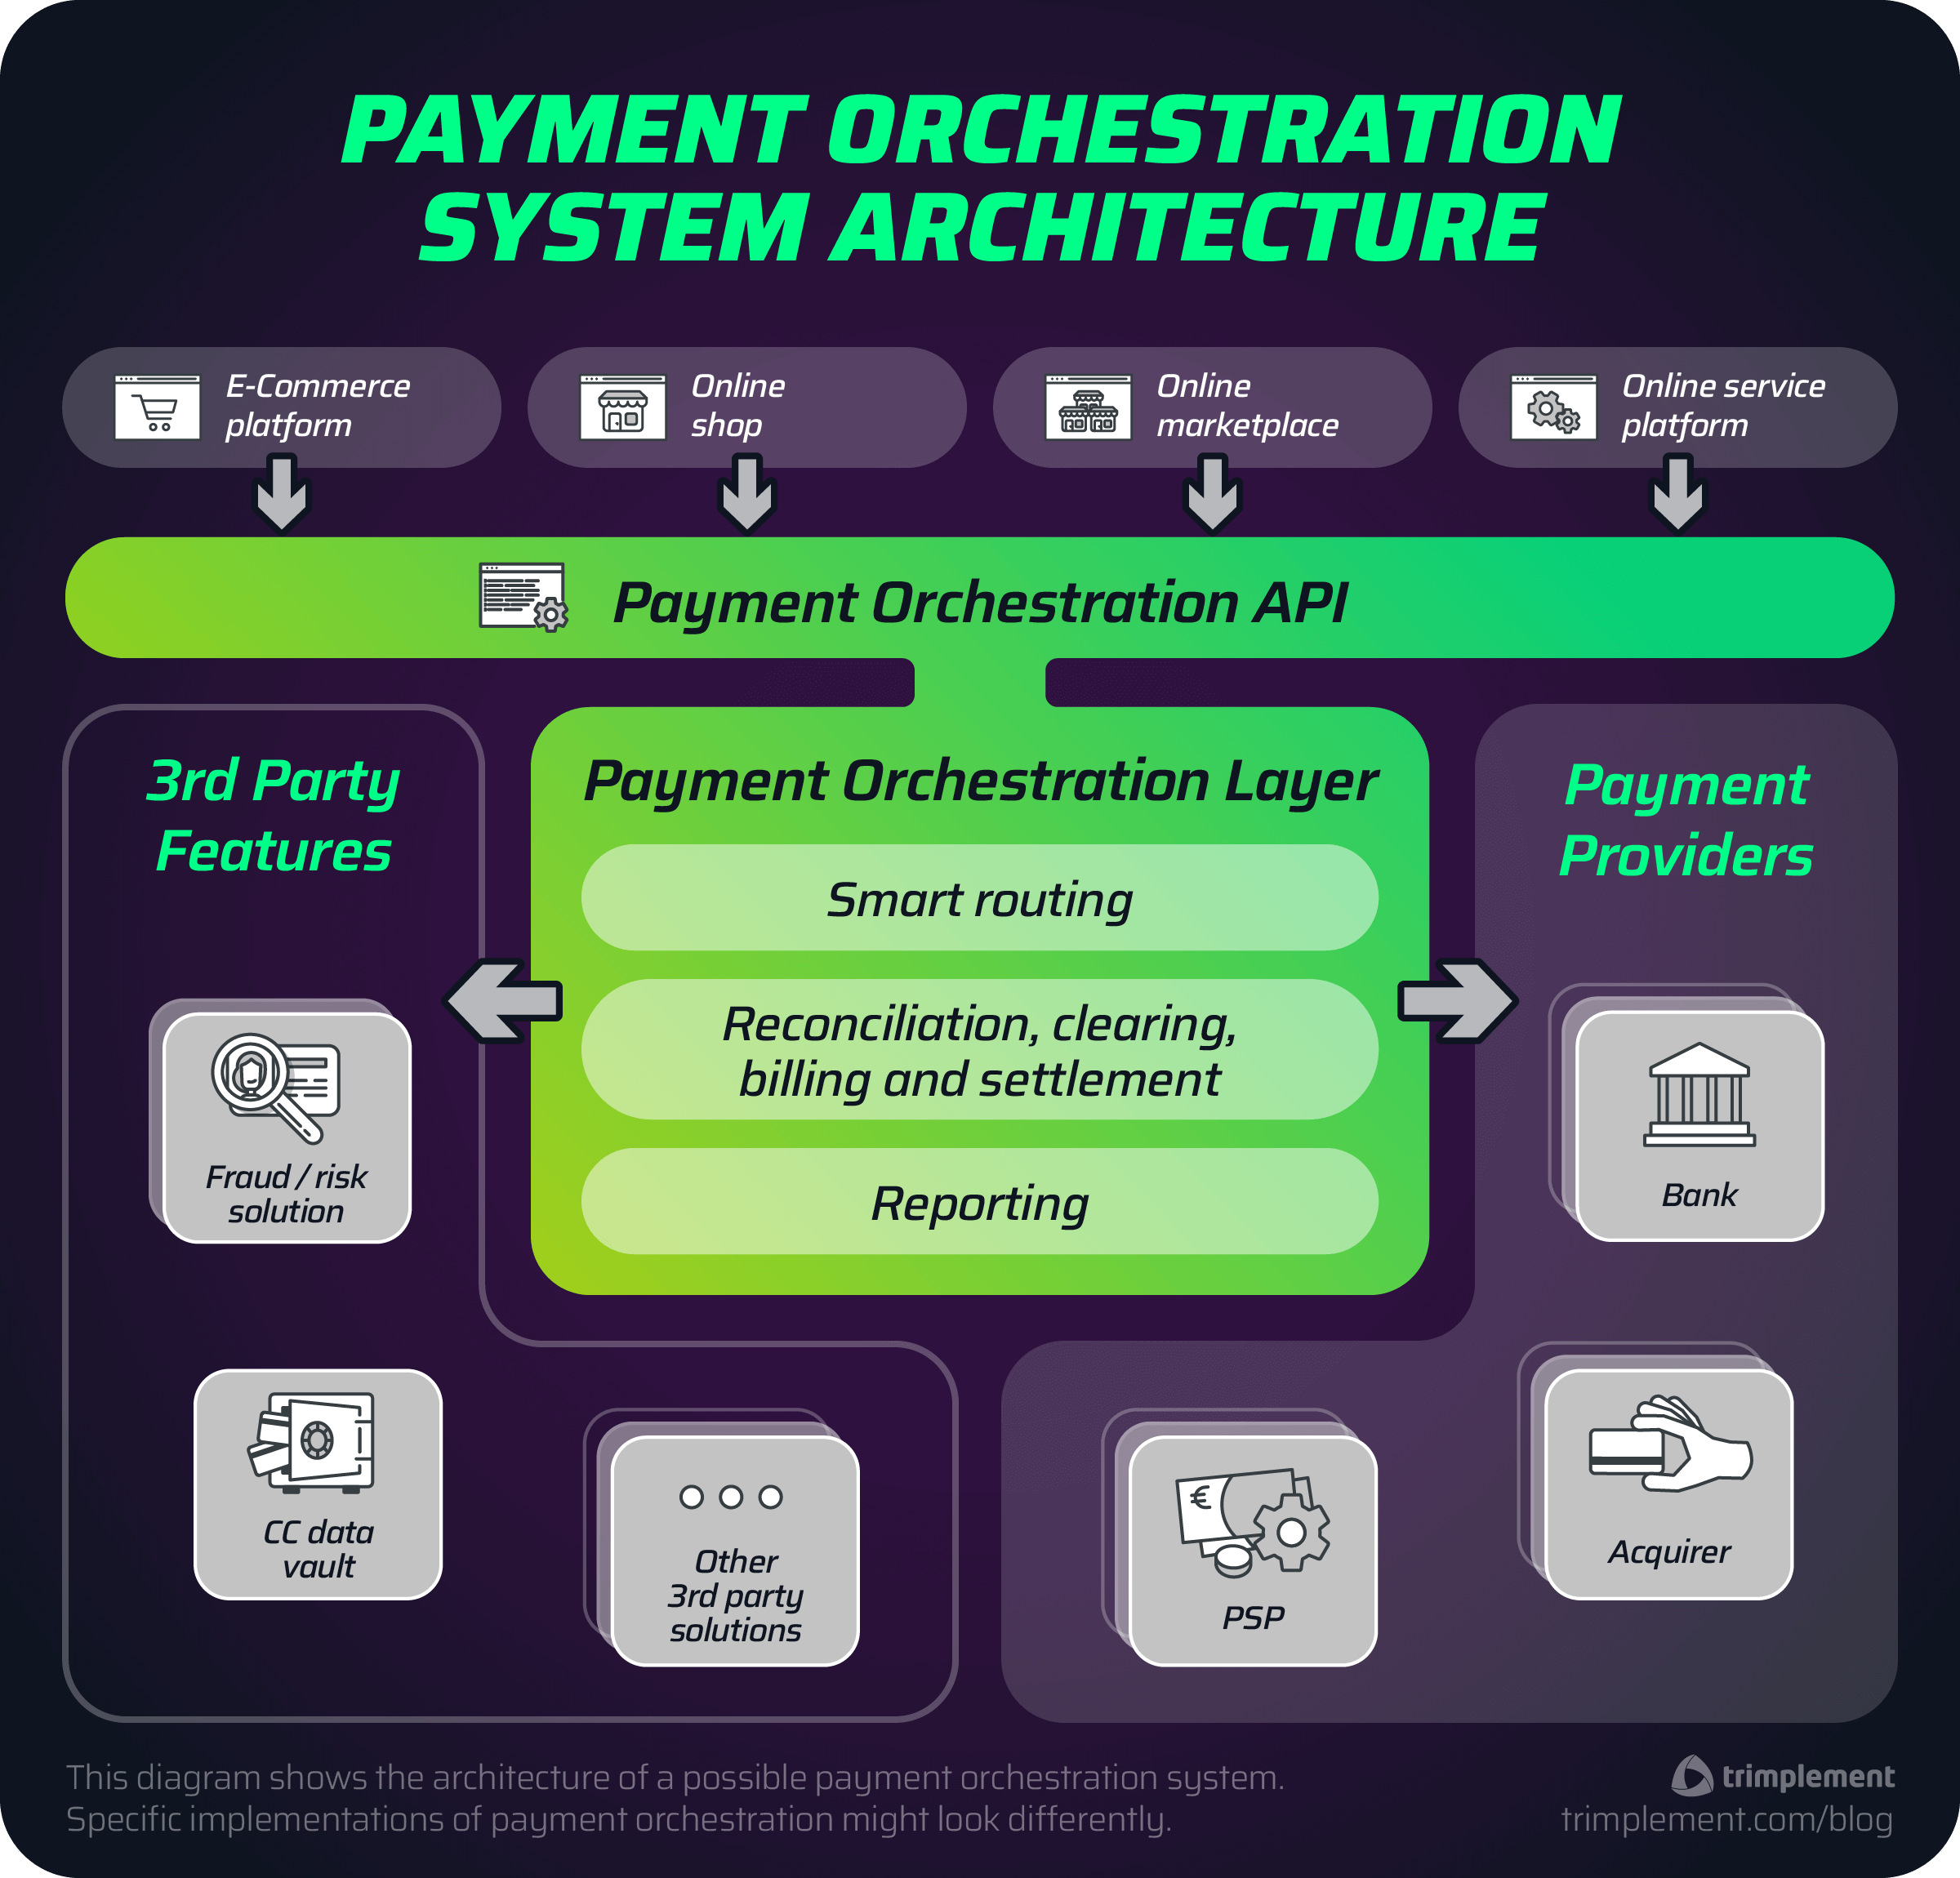 A diagram showing the possible system architecture of a payment orchestration platform and its features